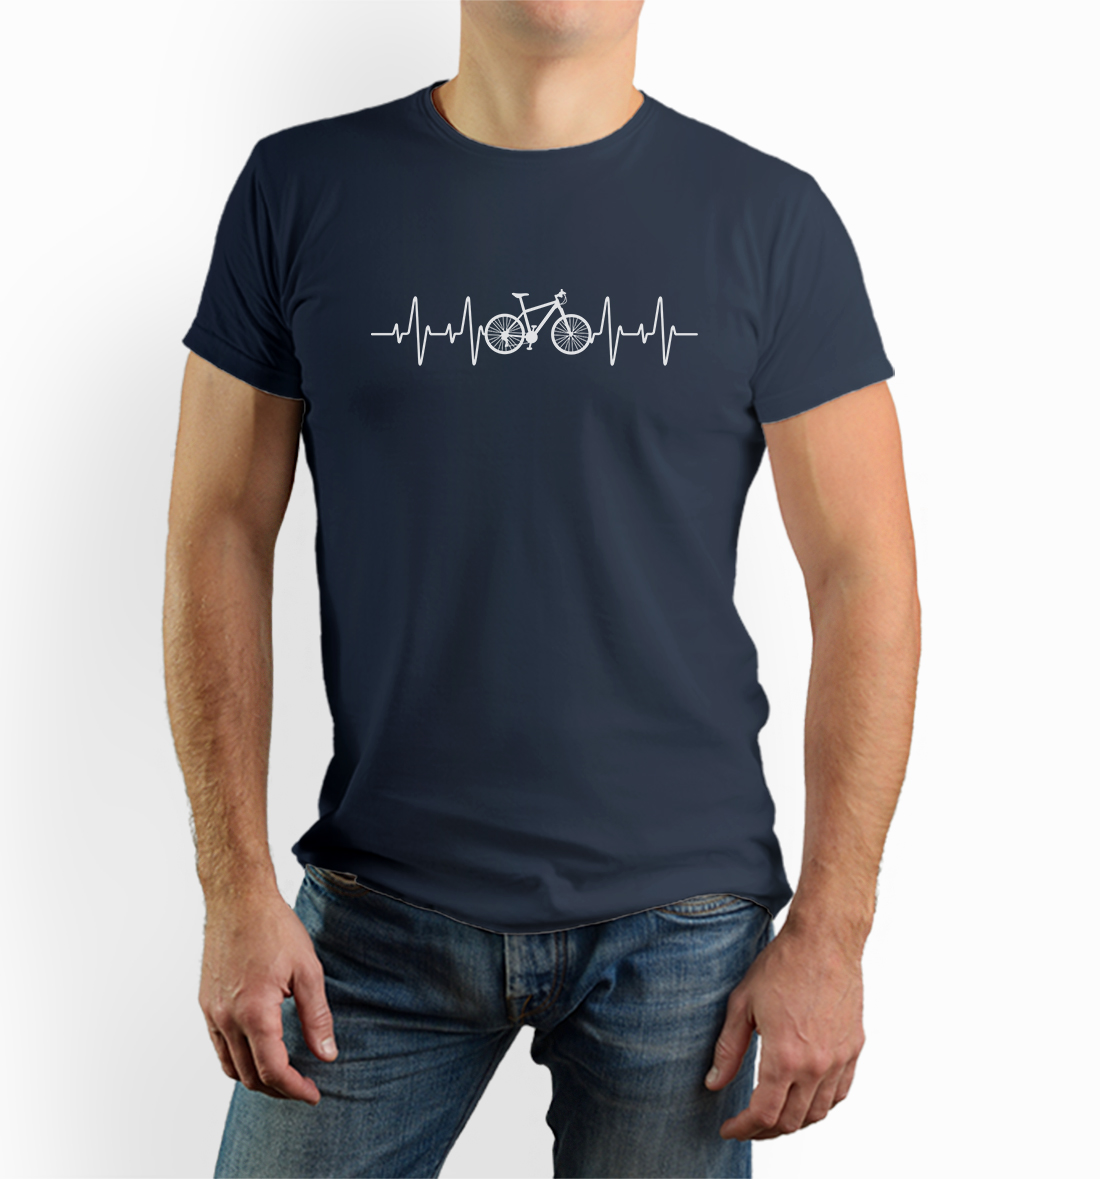 Tshirt with a bicycle